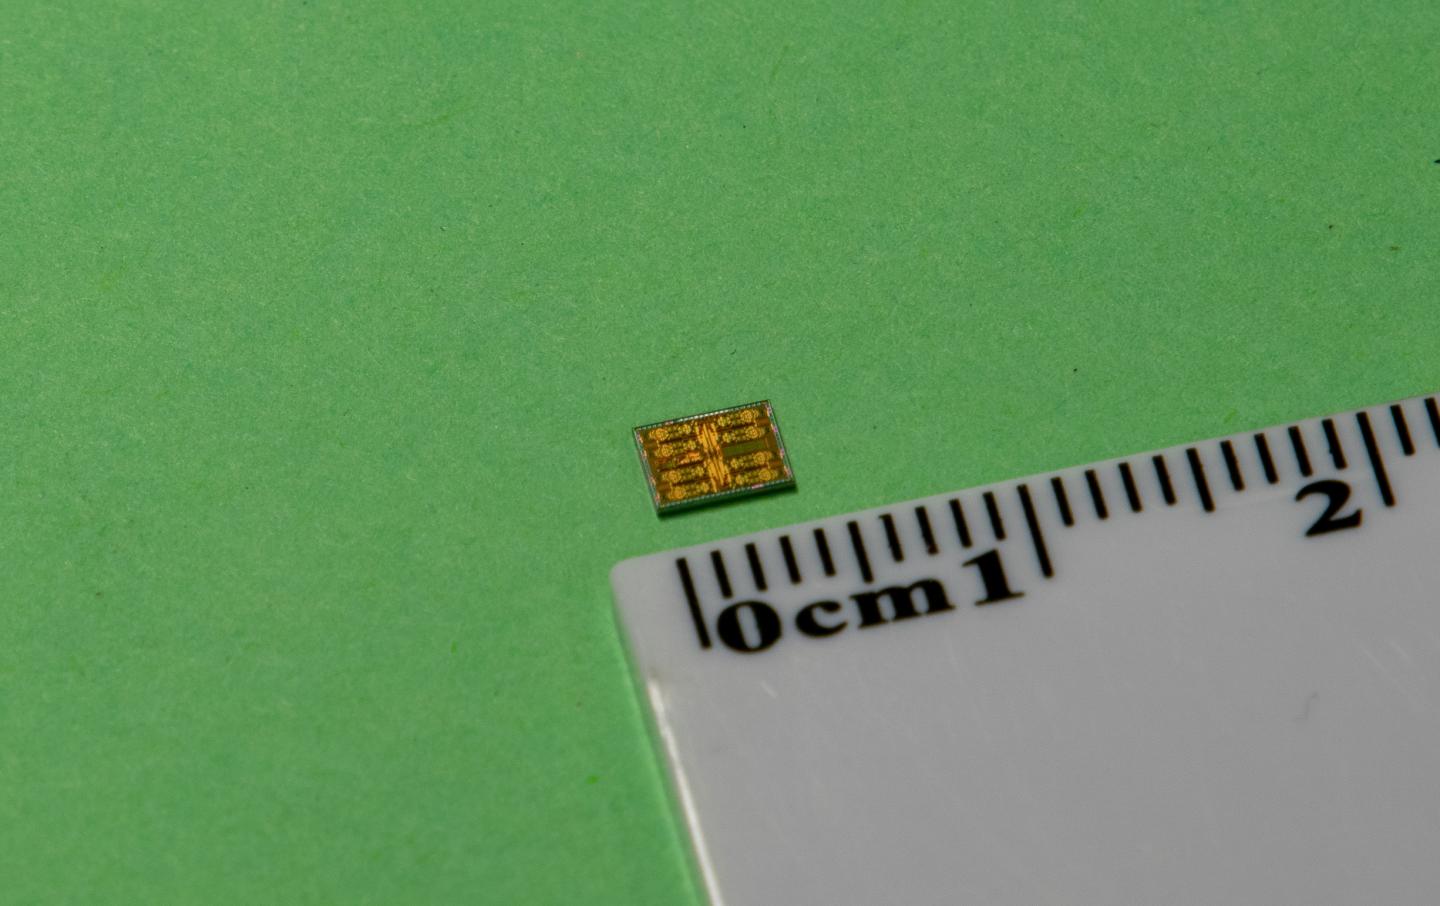 Miniature, Low-Cost Transceiver for Reliable Communications